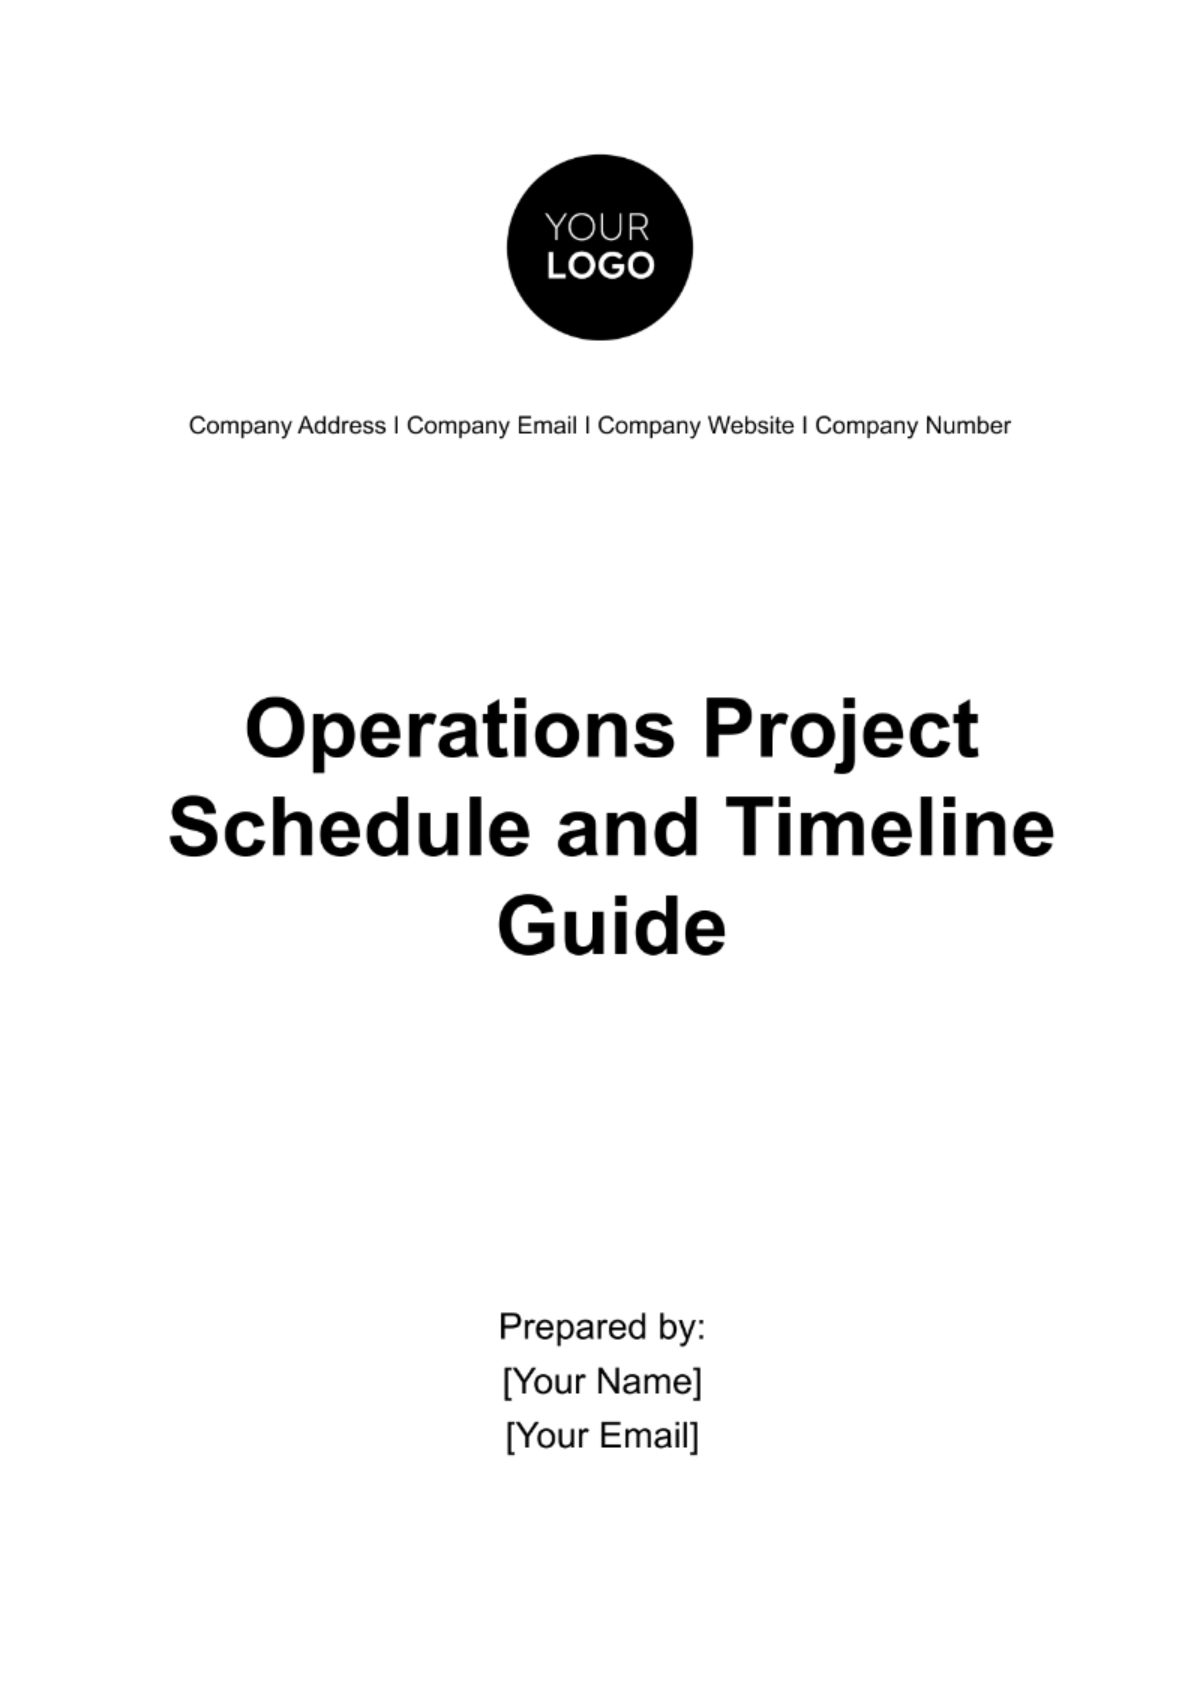 Free Operations Project Schedule and Timeline Guide Template